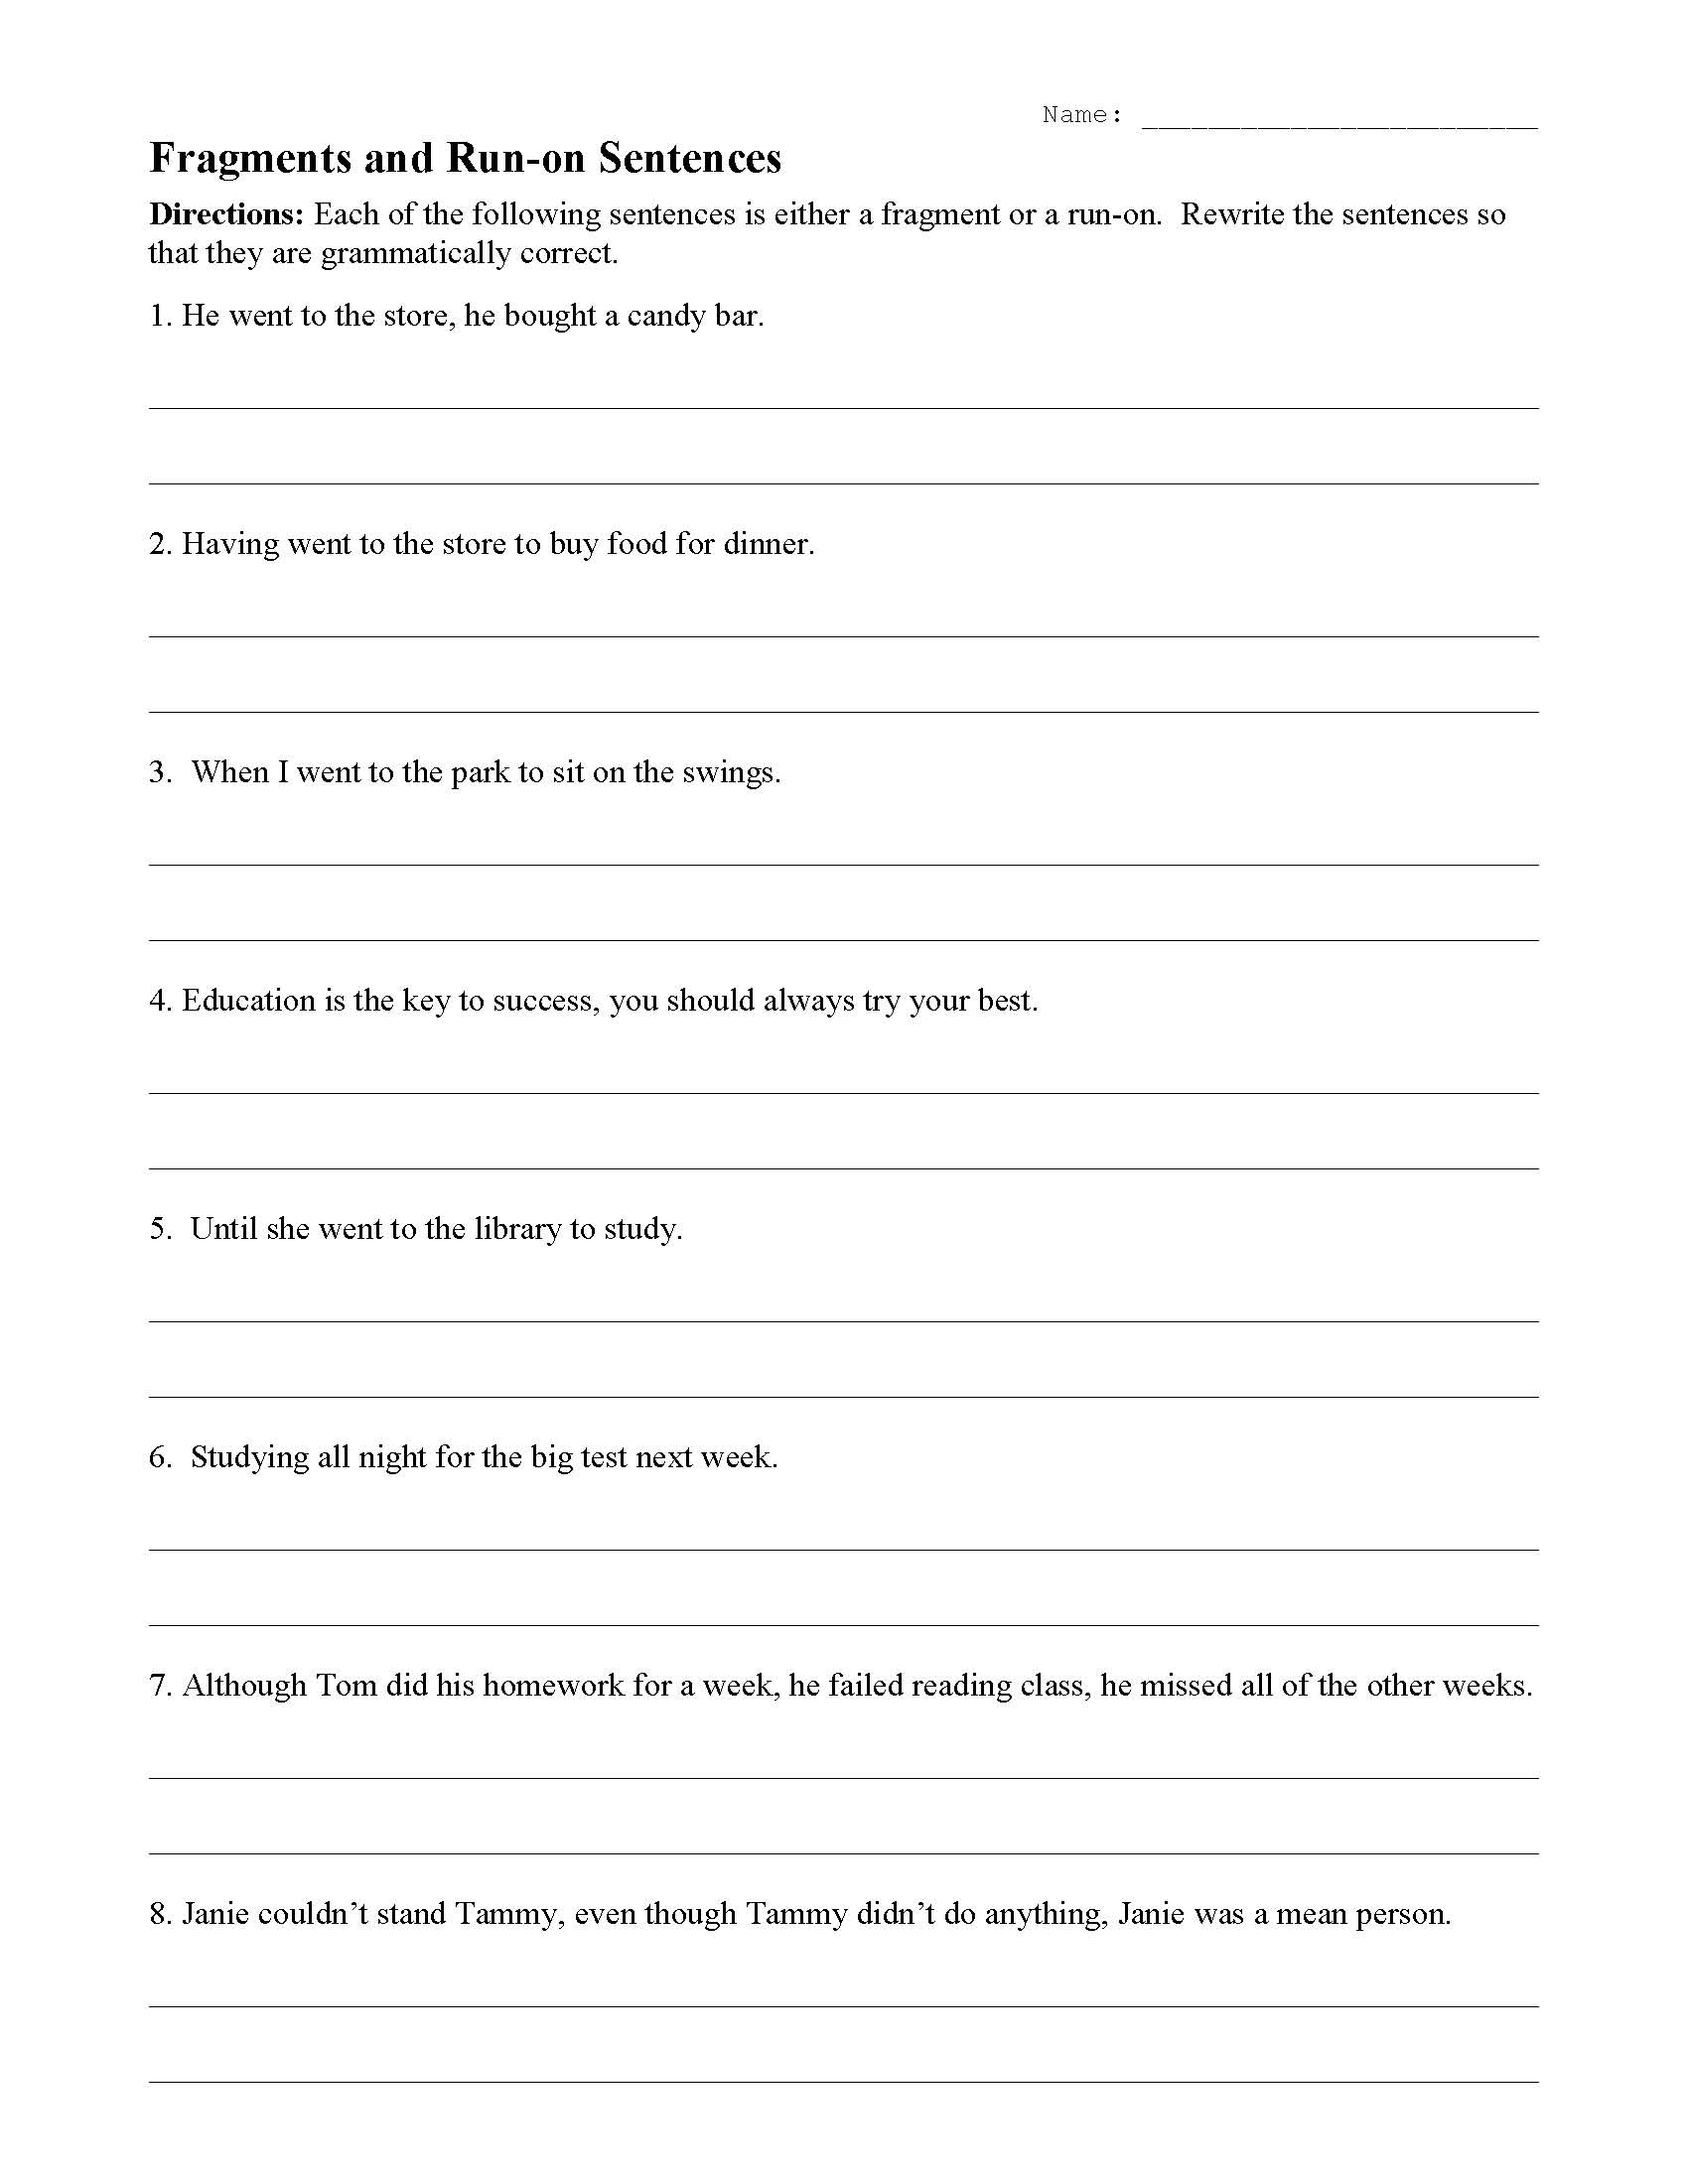 Fragments and Run-On Sentences Worksheet | Sentence Structure Activity